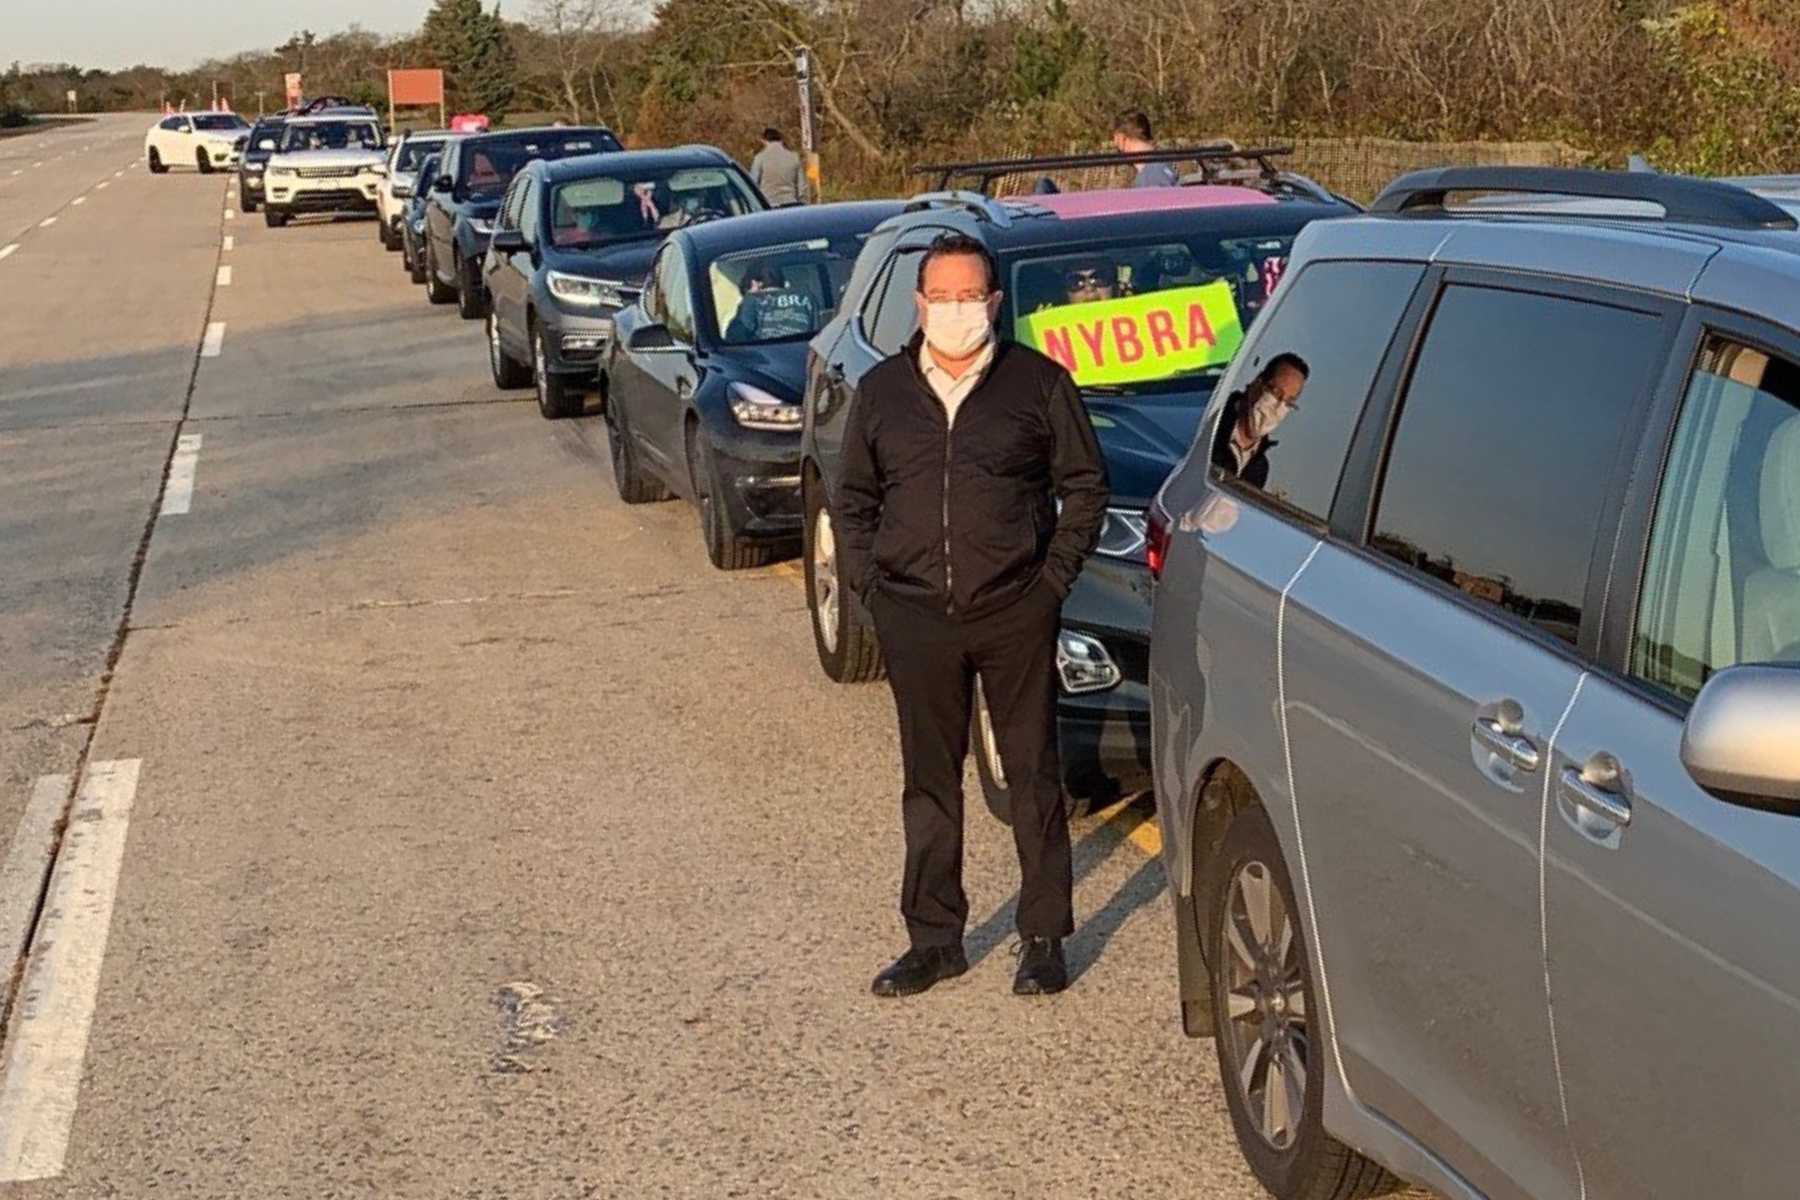 Dr. Feingold stands in front of NYBRA line of cars before the Making Strides 2020 Drive Through Experience at Jones Beach.